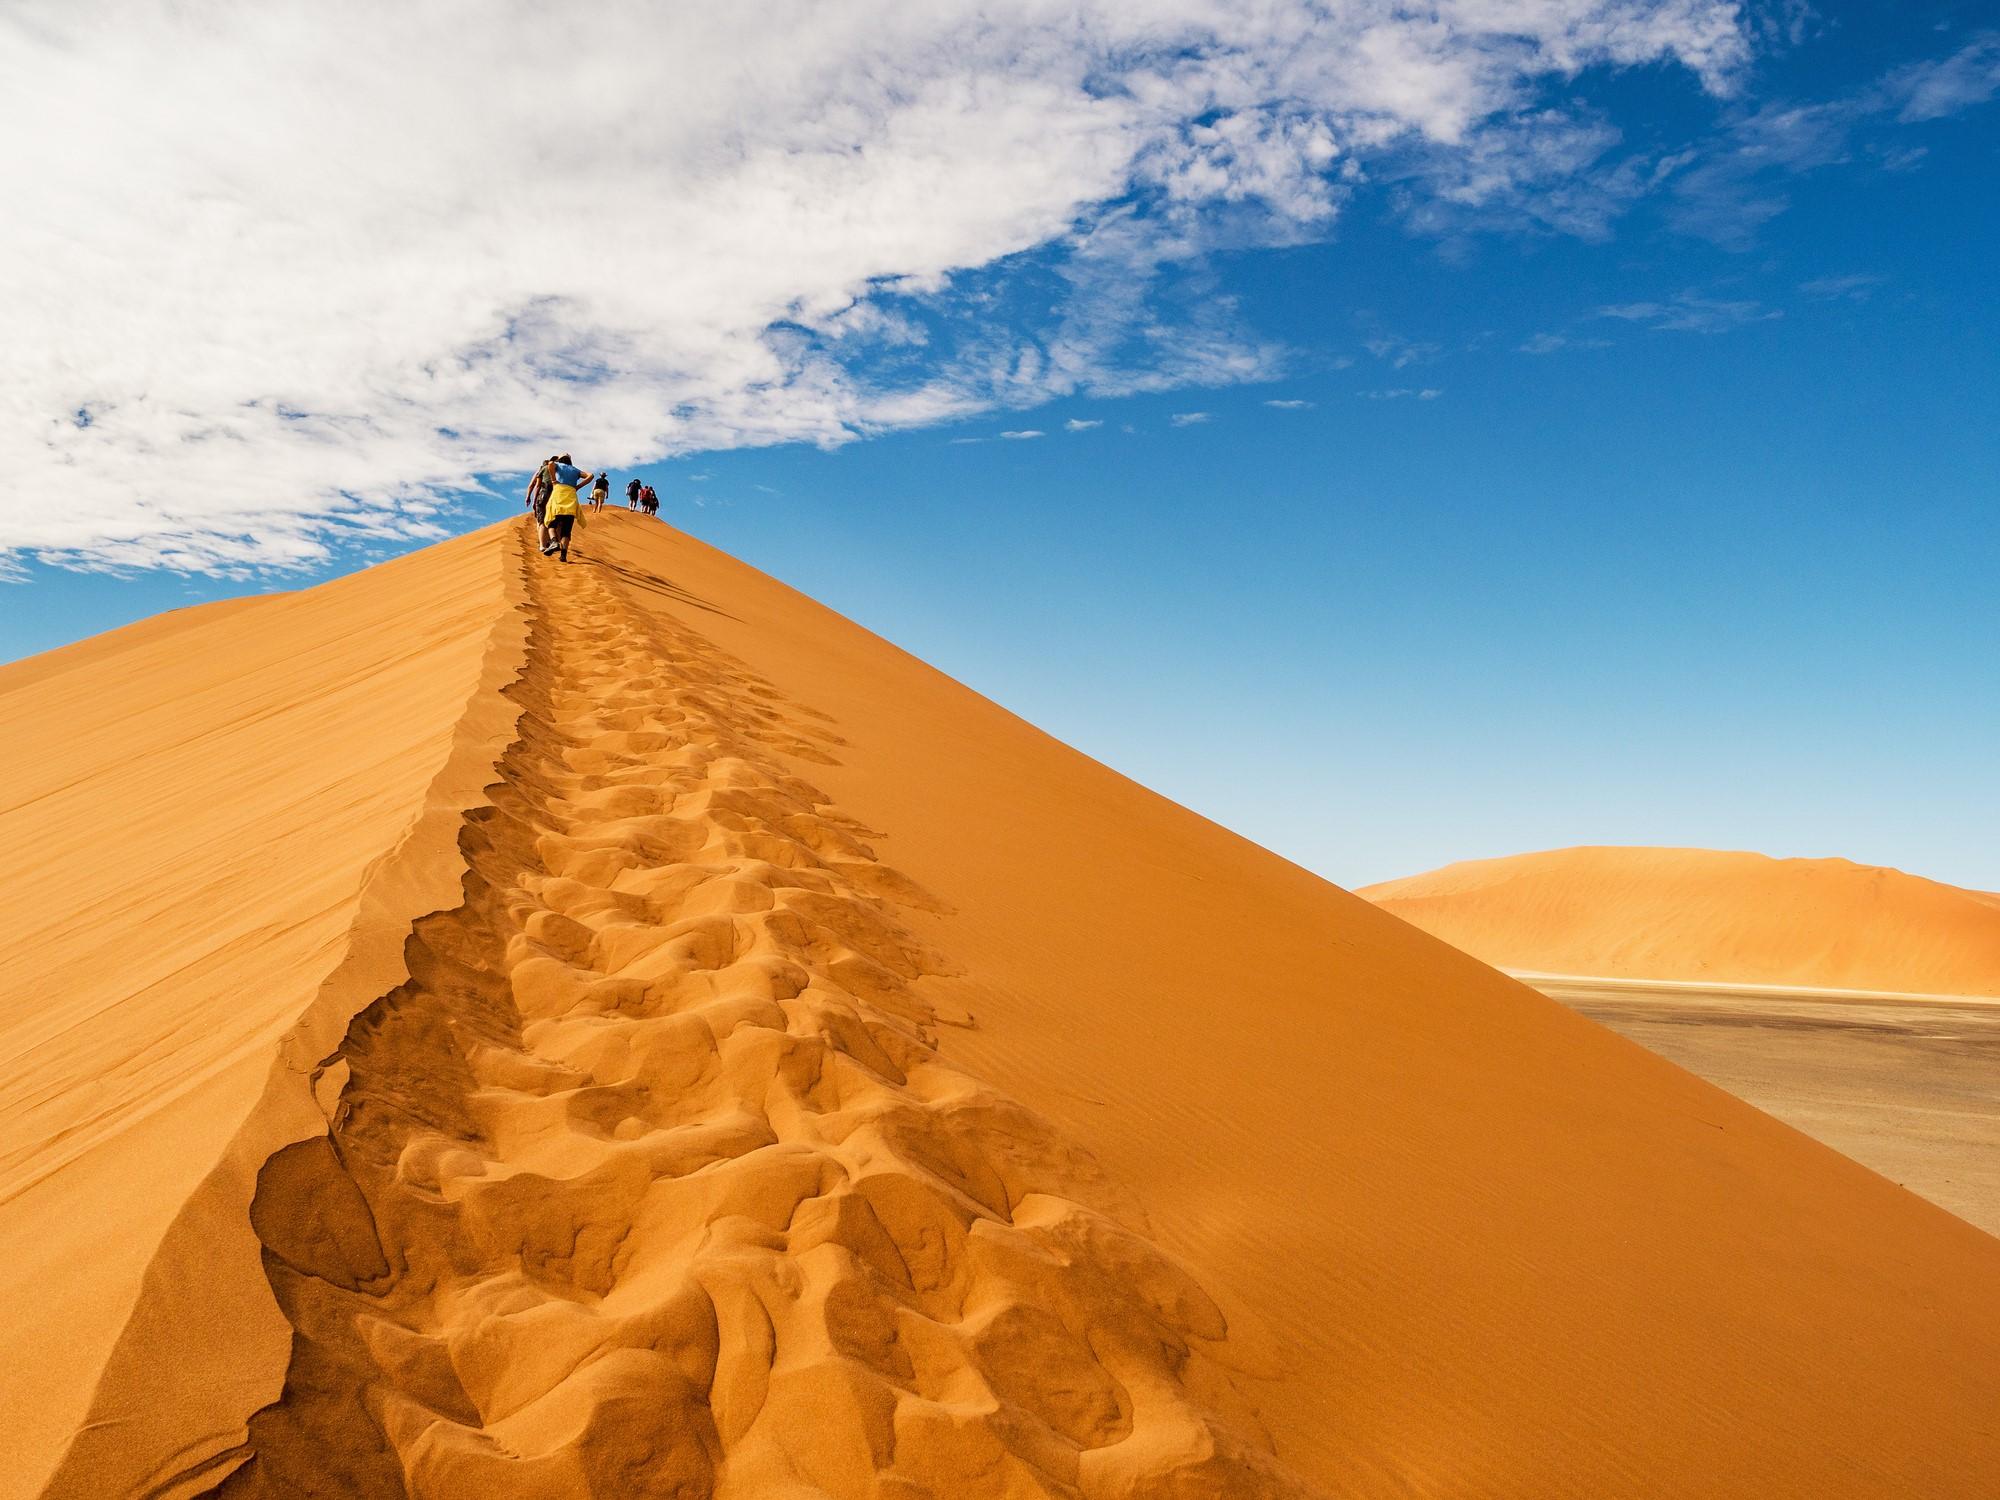 Hiking to the top of Dune 45 (Getty/iStock)